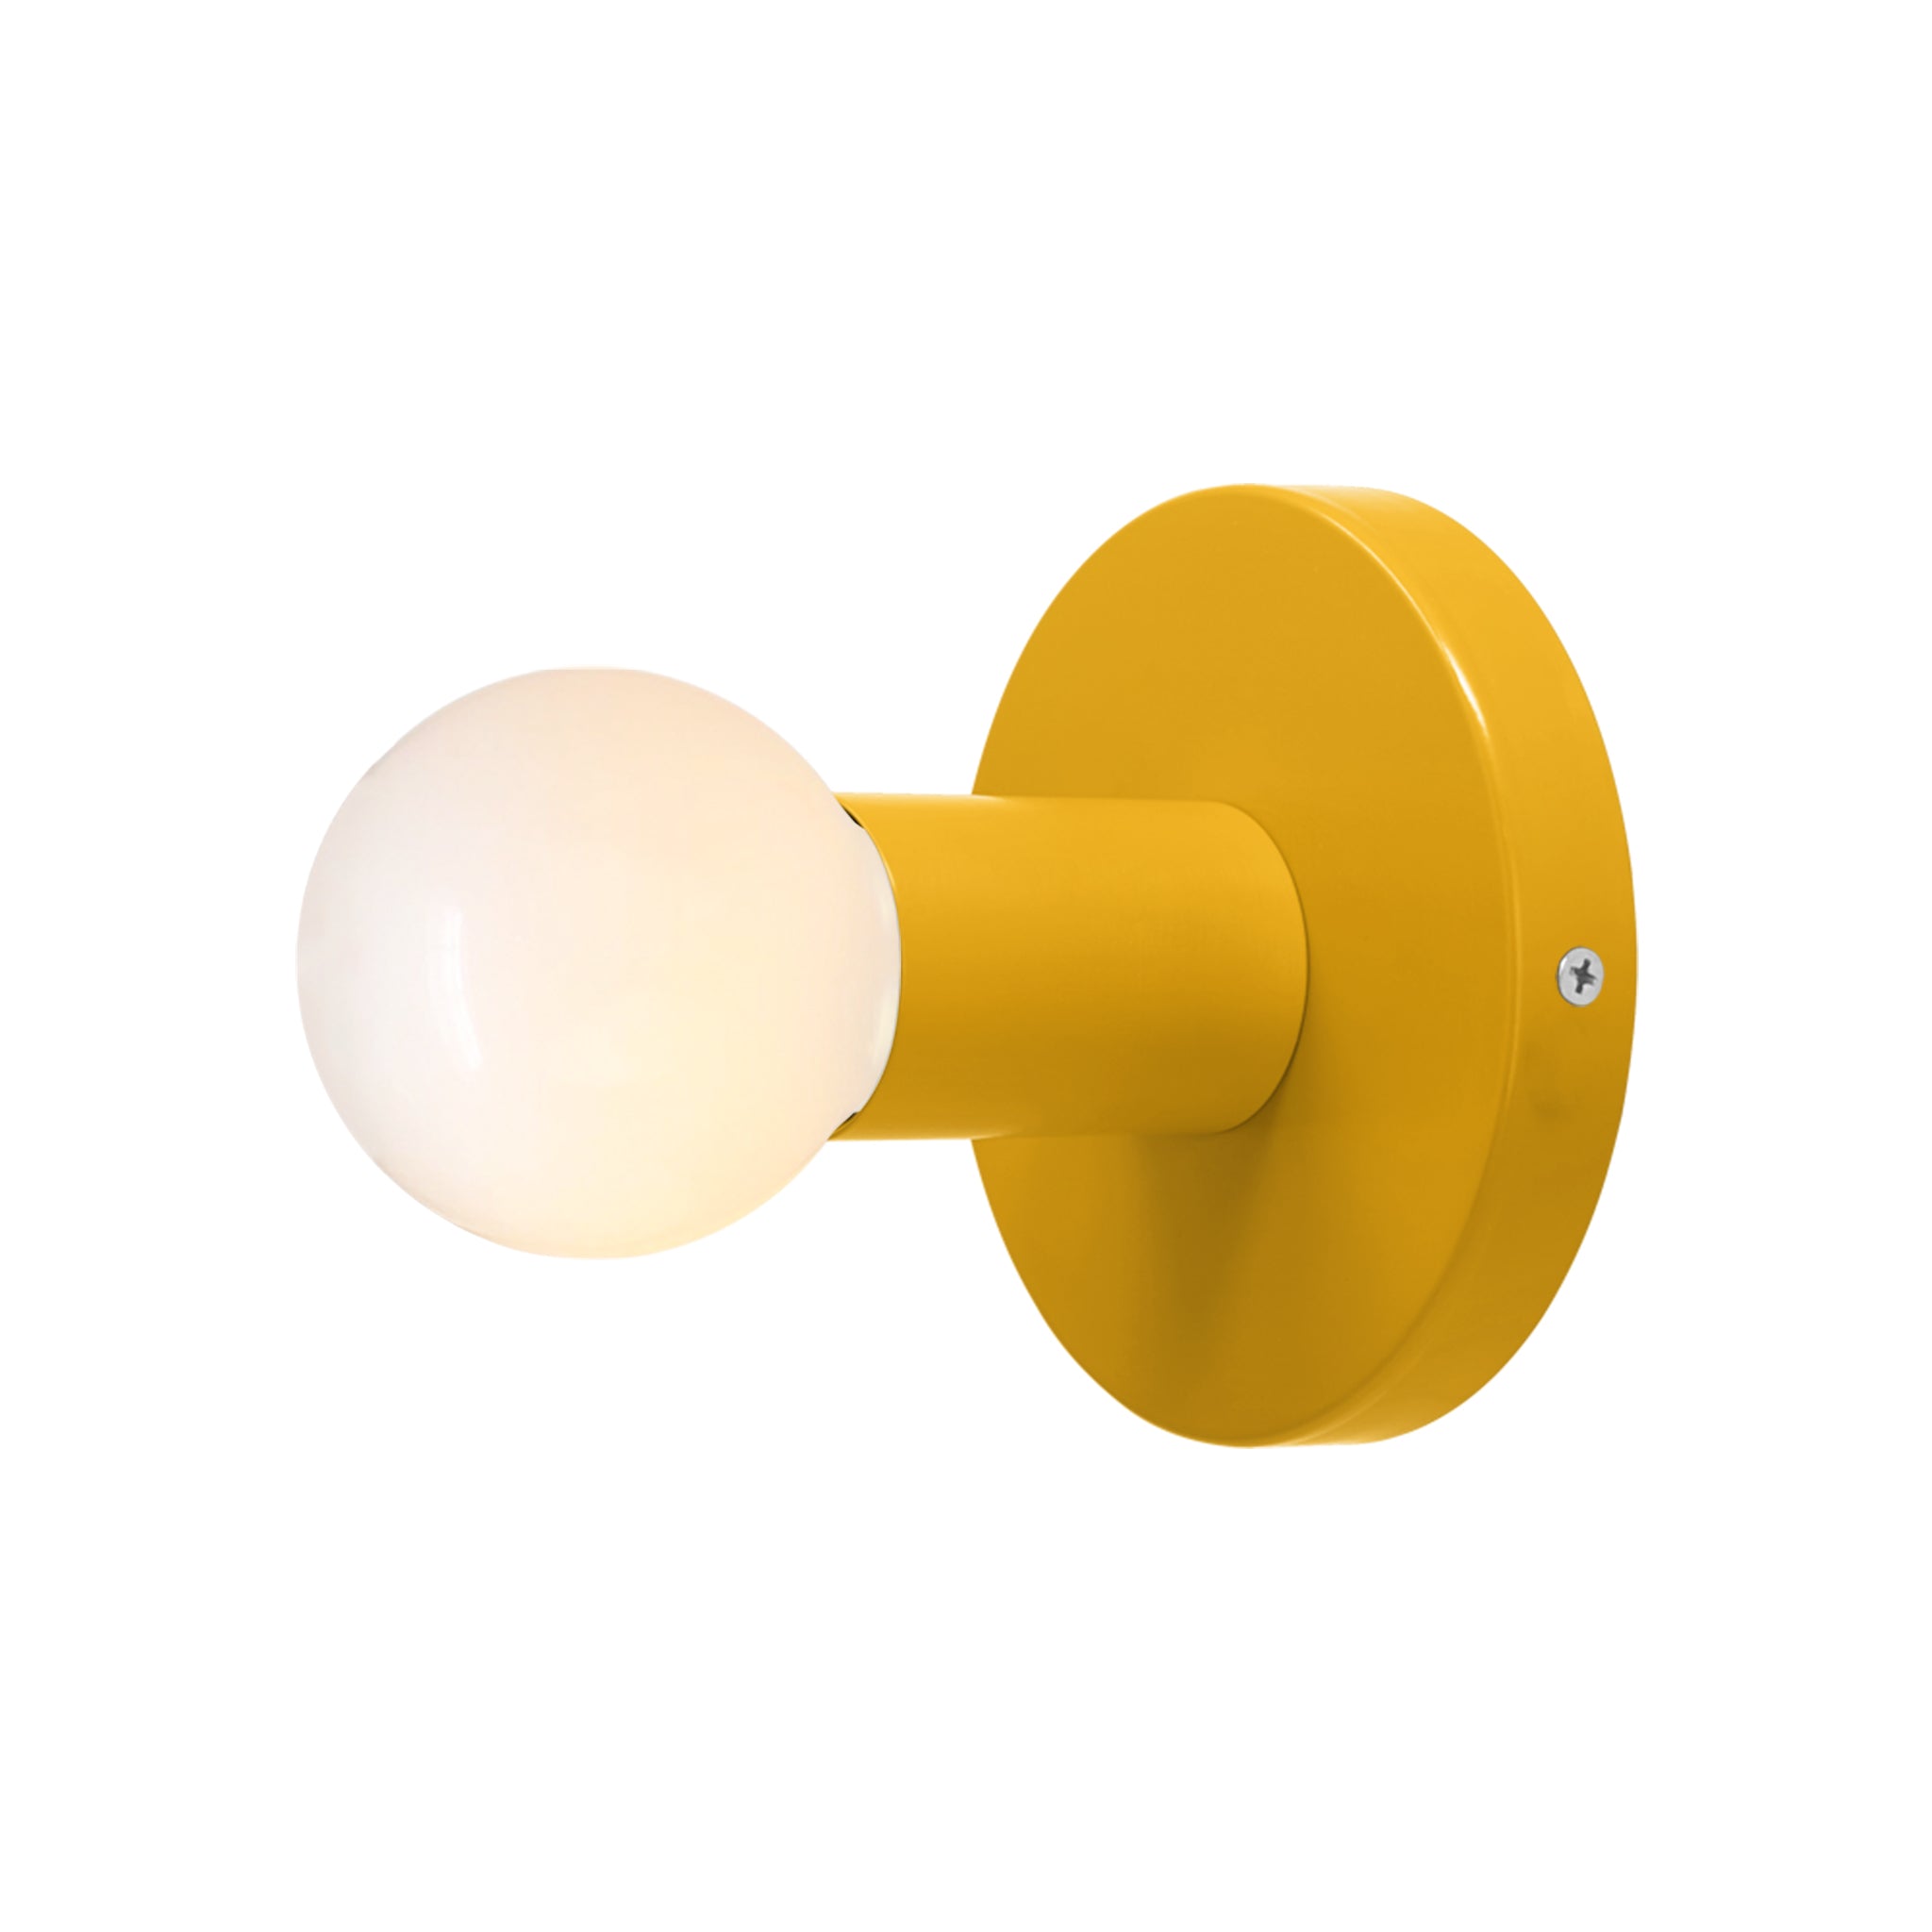 Nickel and ochre color Twink sconce Dutton Brown lighting